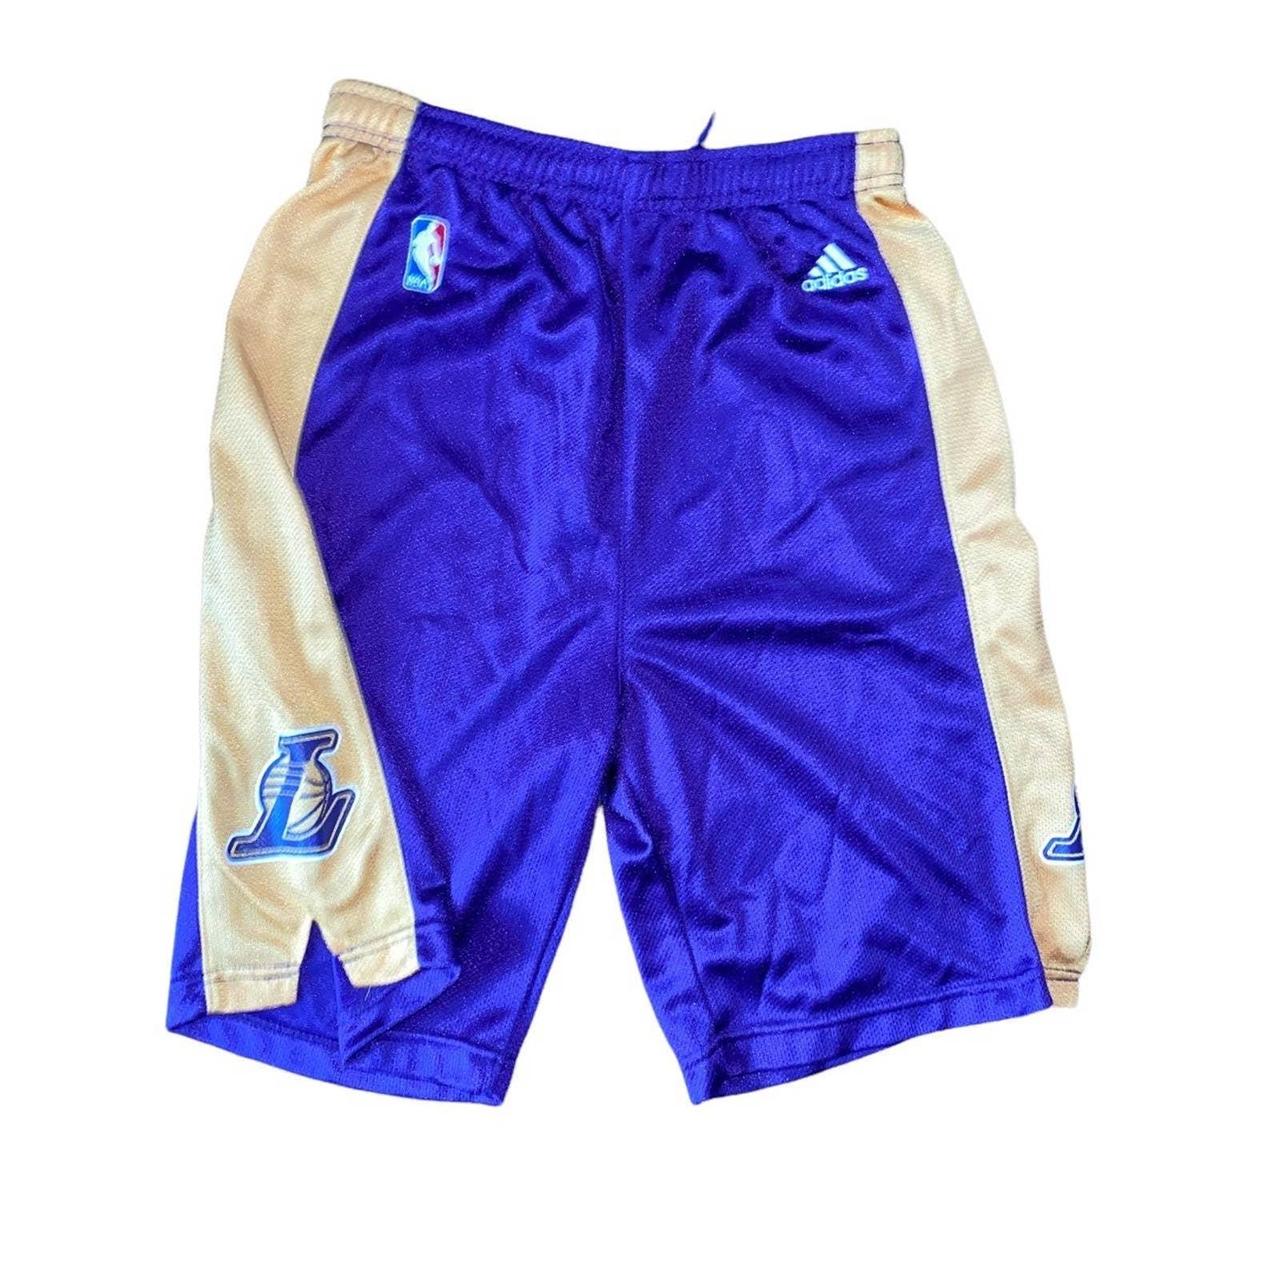 Boys Los Angeles Lakers Gold New Replica Basketball Shorts on Sale